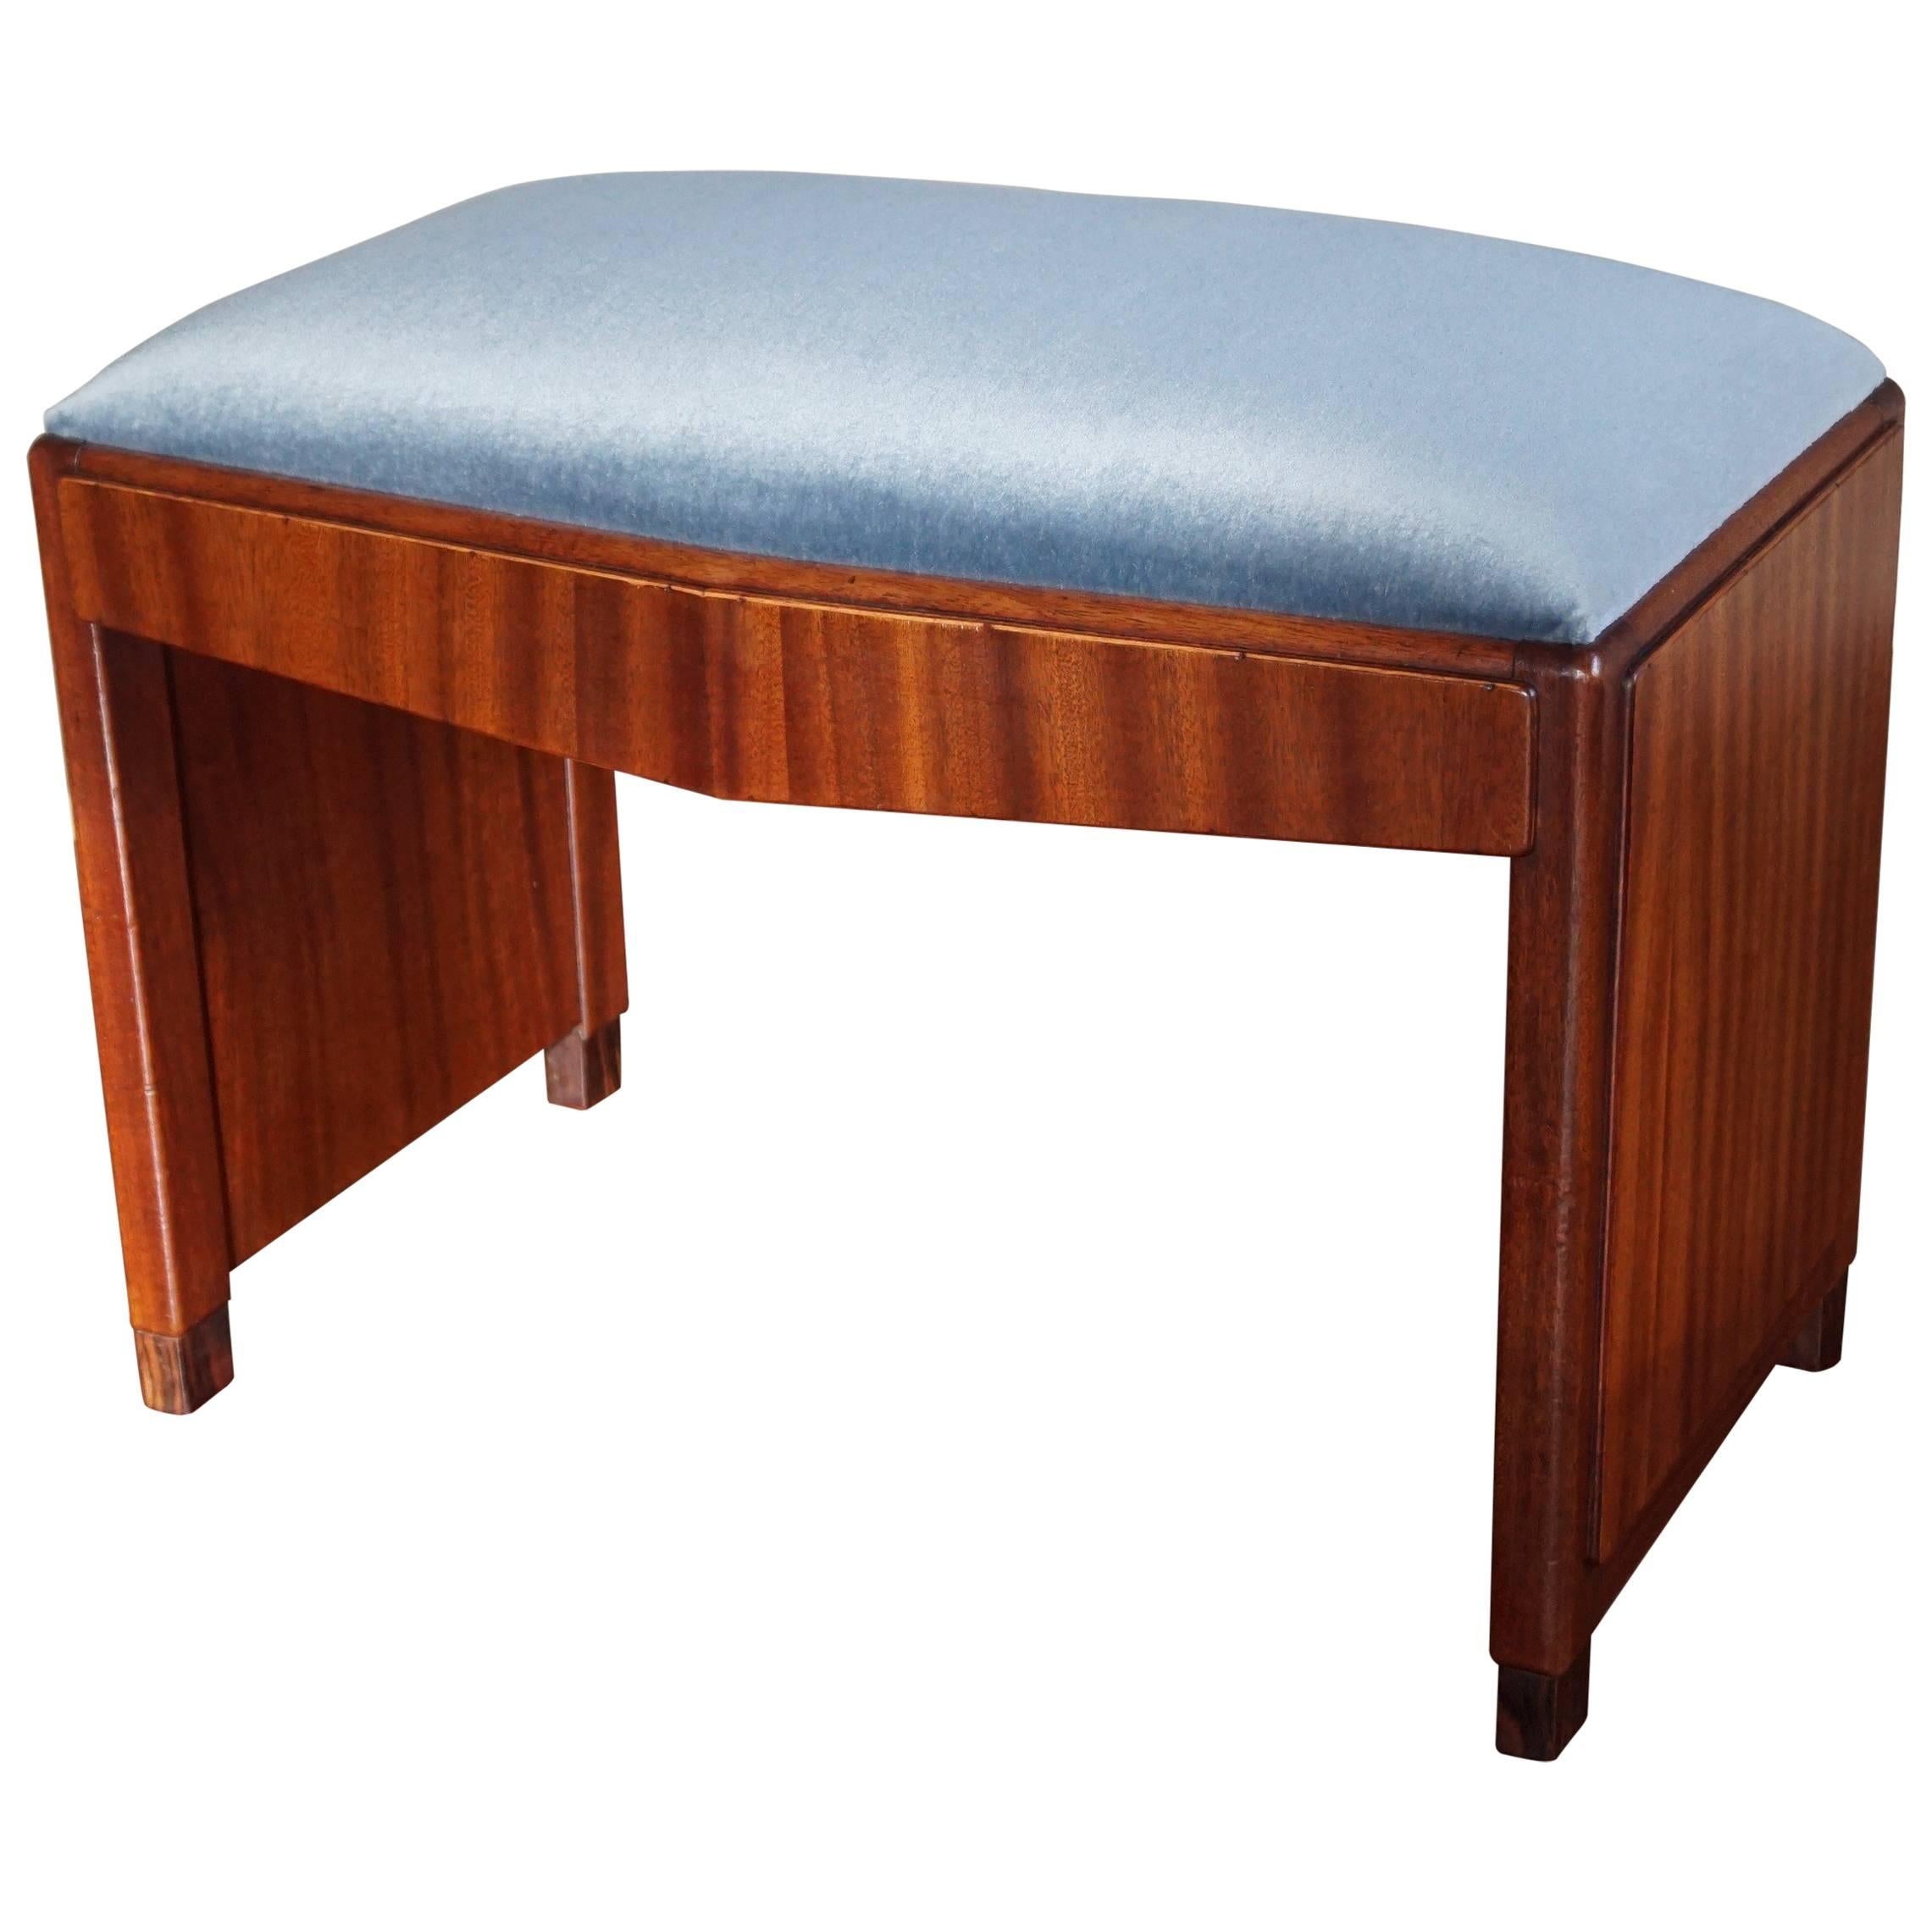 Stunning Mahogany Art Deco Hall Bench or Stool with Perfect Grey-Blue Upholstery